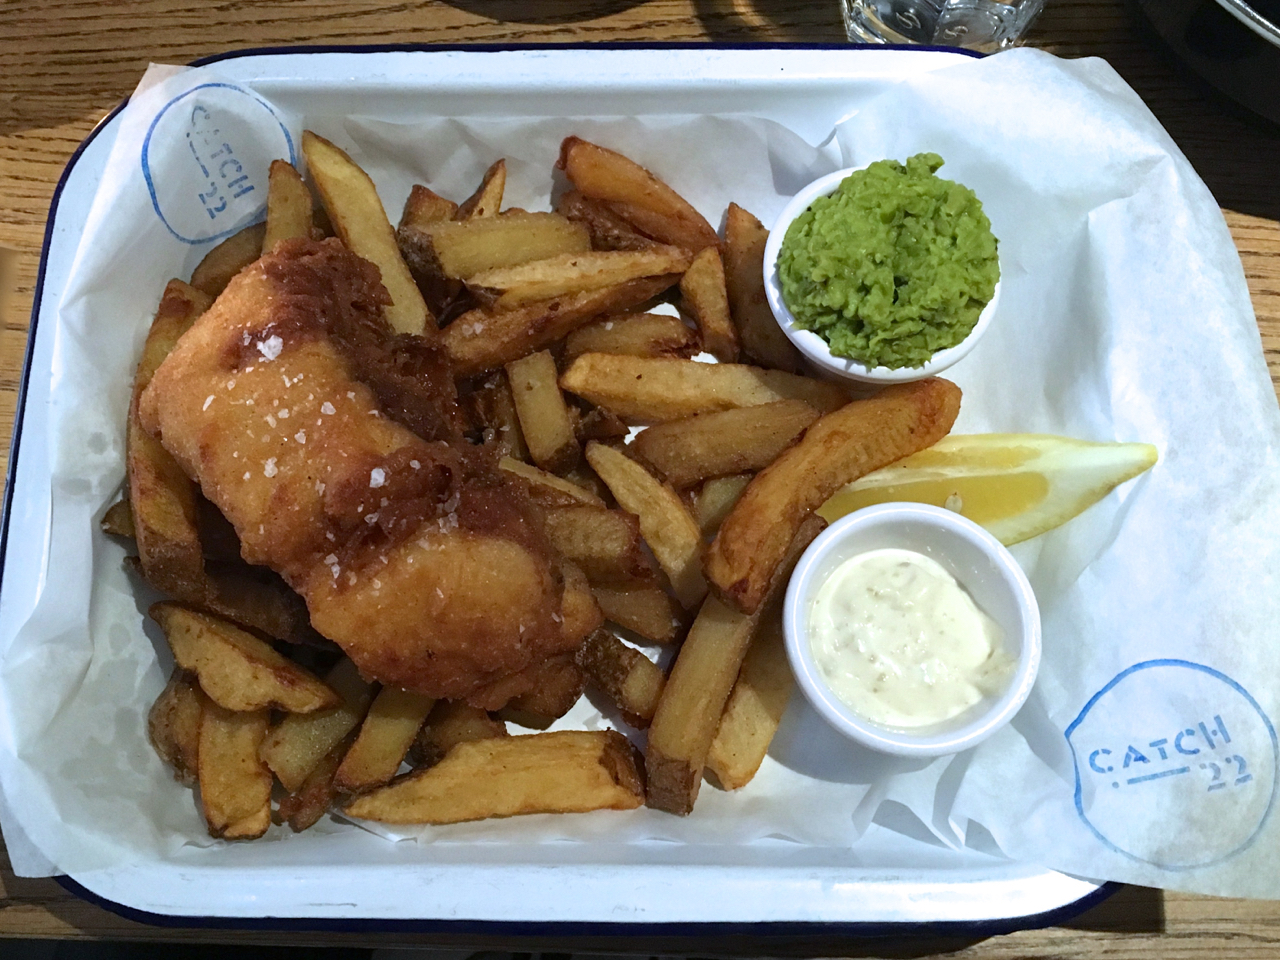 Fish and chips in Dublin - Catch 22